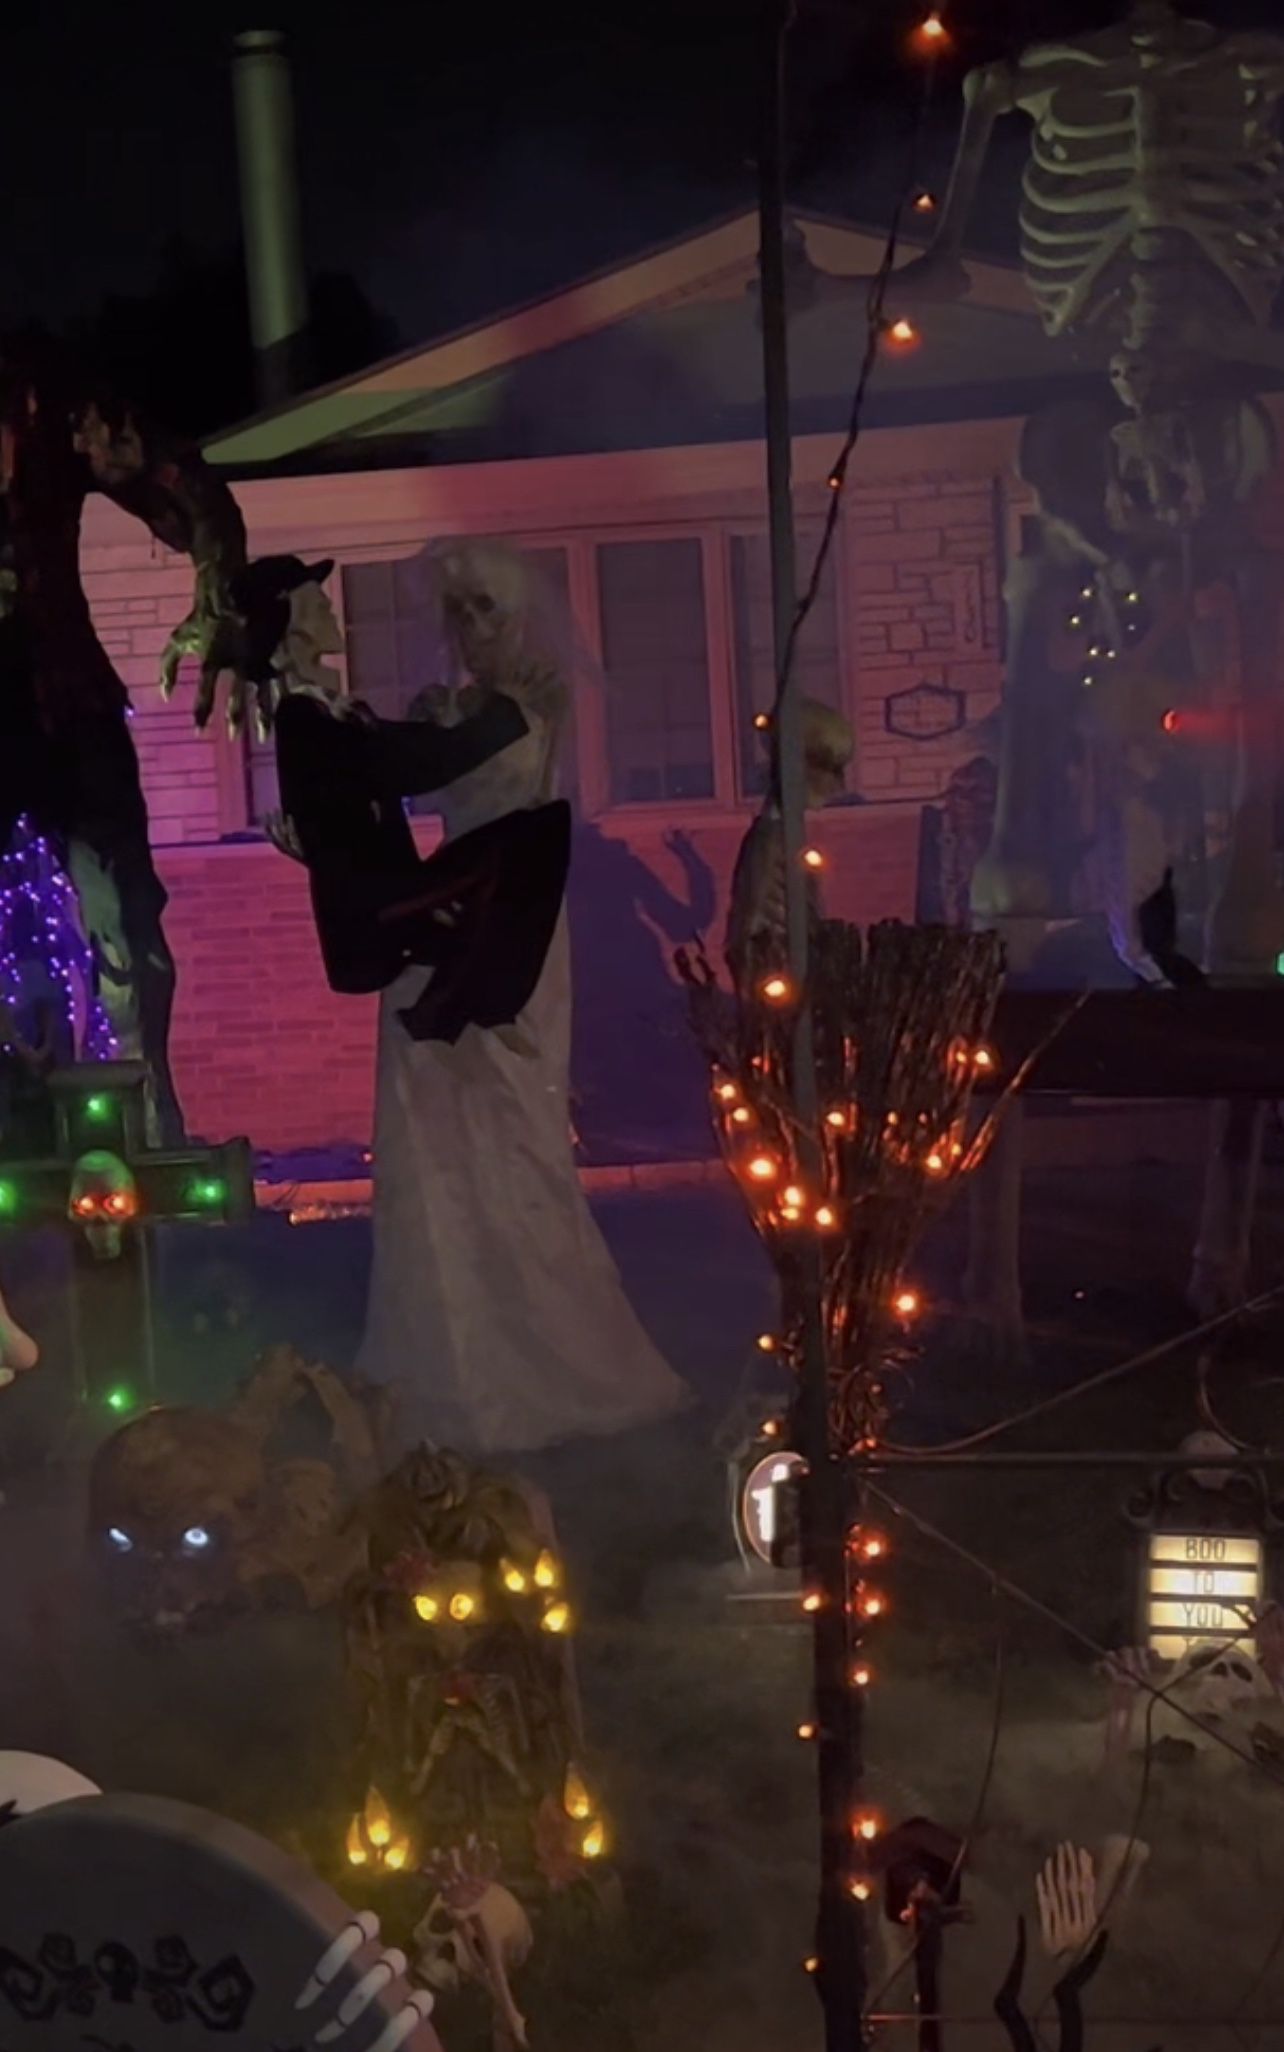 Animated Dead Bride And Groom Skeletons / Halloween Decorations 